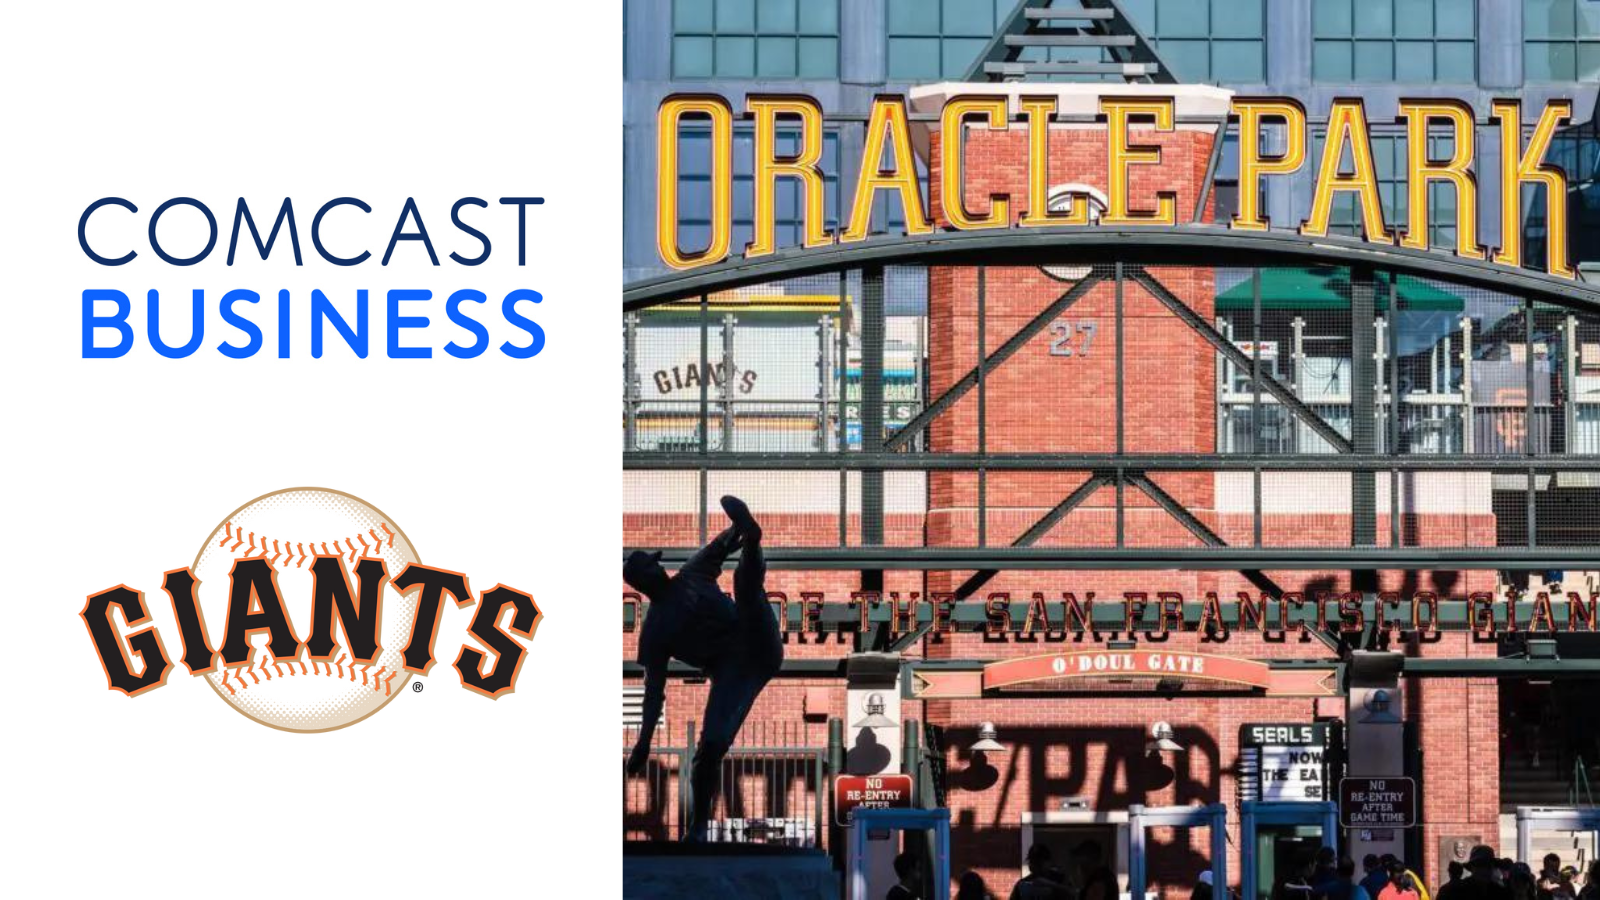 San Francisco Giants Partner with Comcast Business to Make Oracle Park the First 100% WiFi 6E-Ready Professional Sports Venue